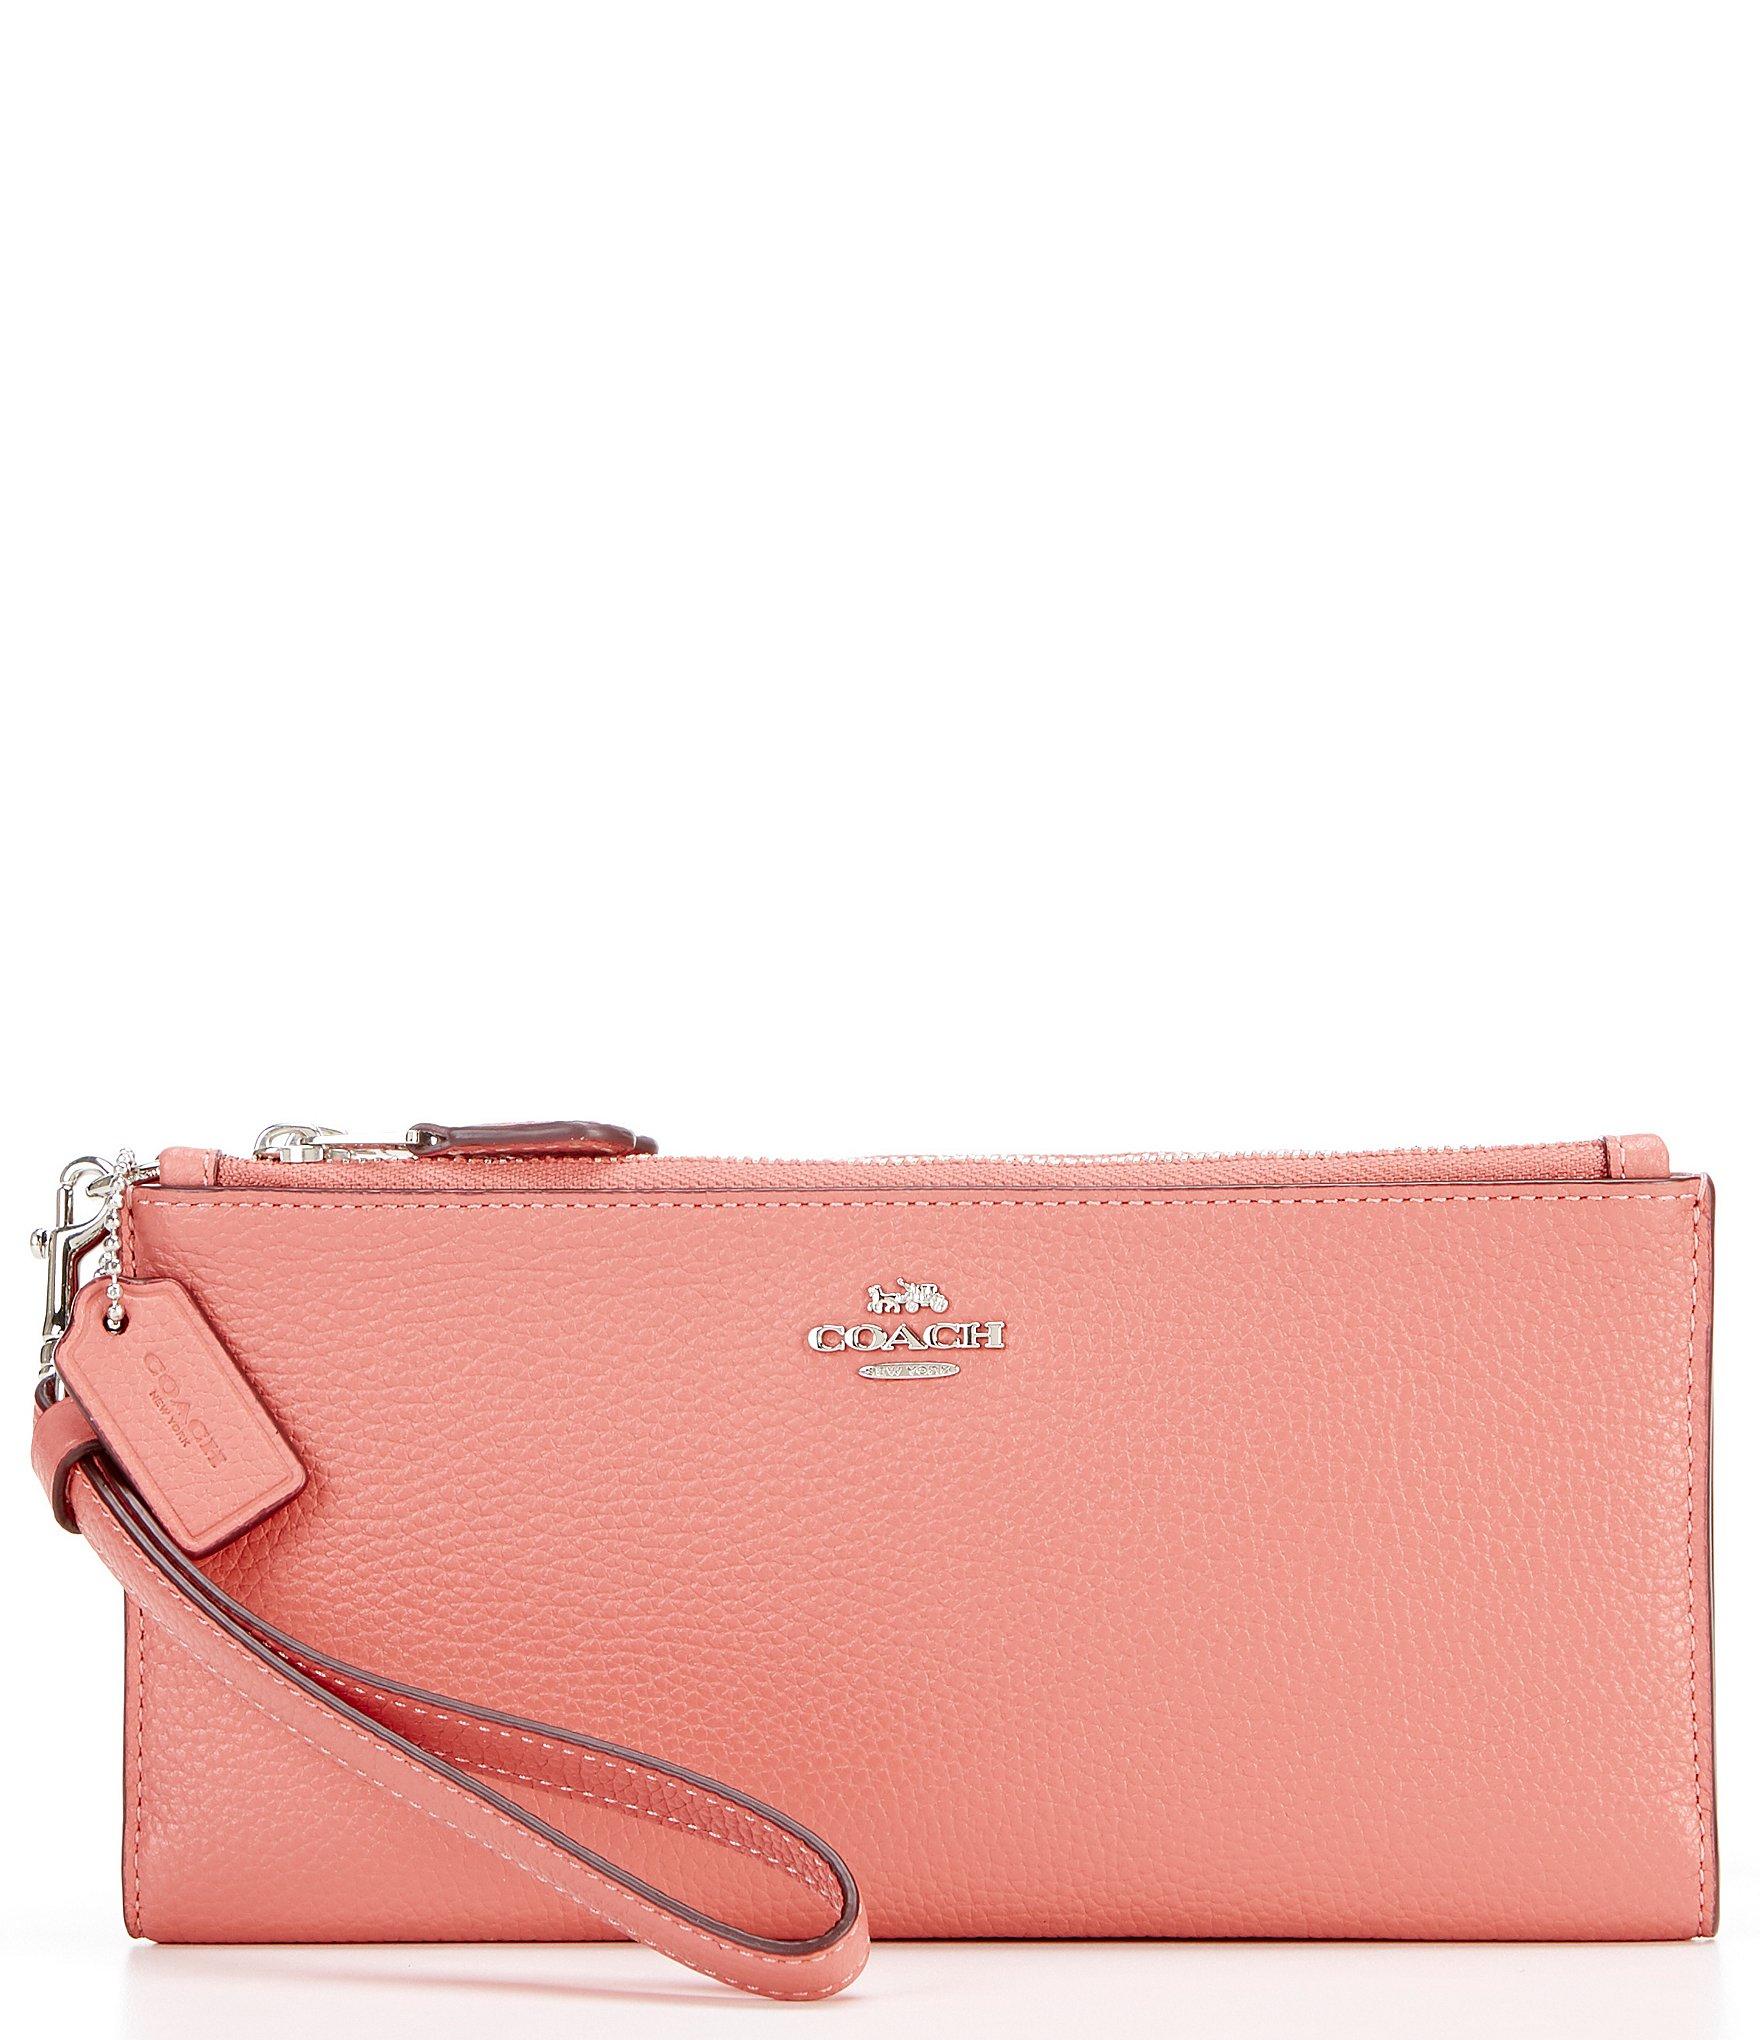 COACH Small Double Zip Wallet in Pink - Lyst